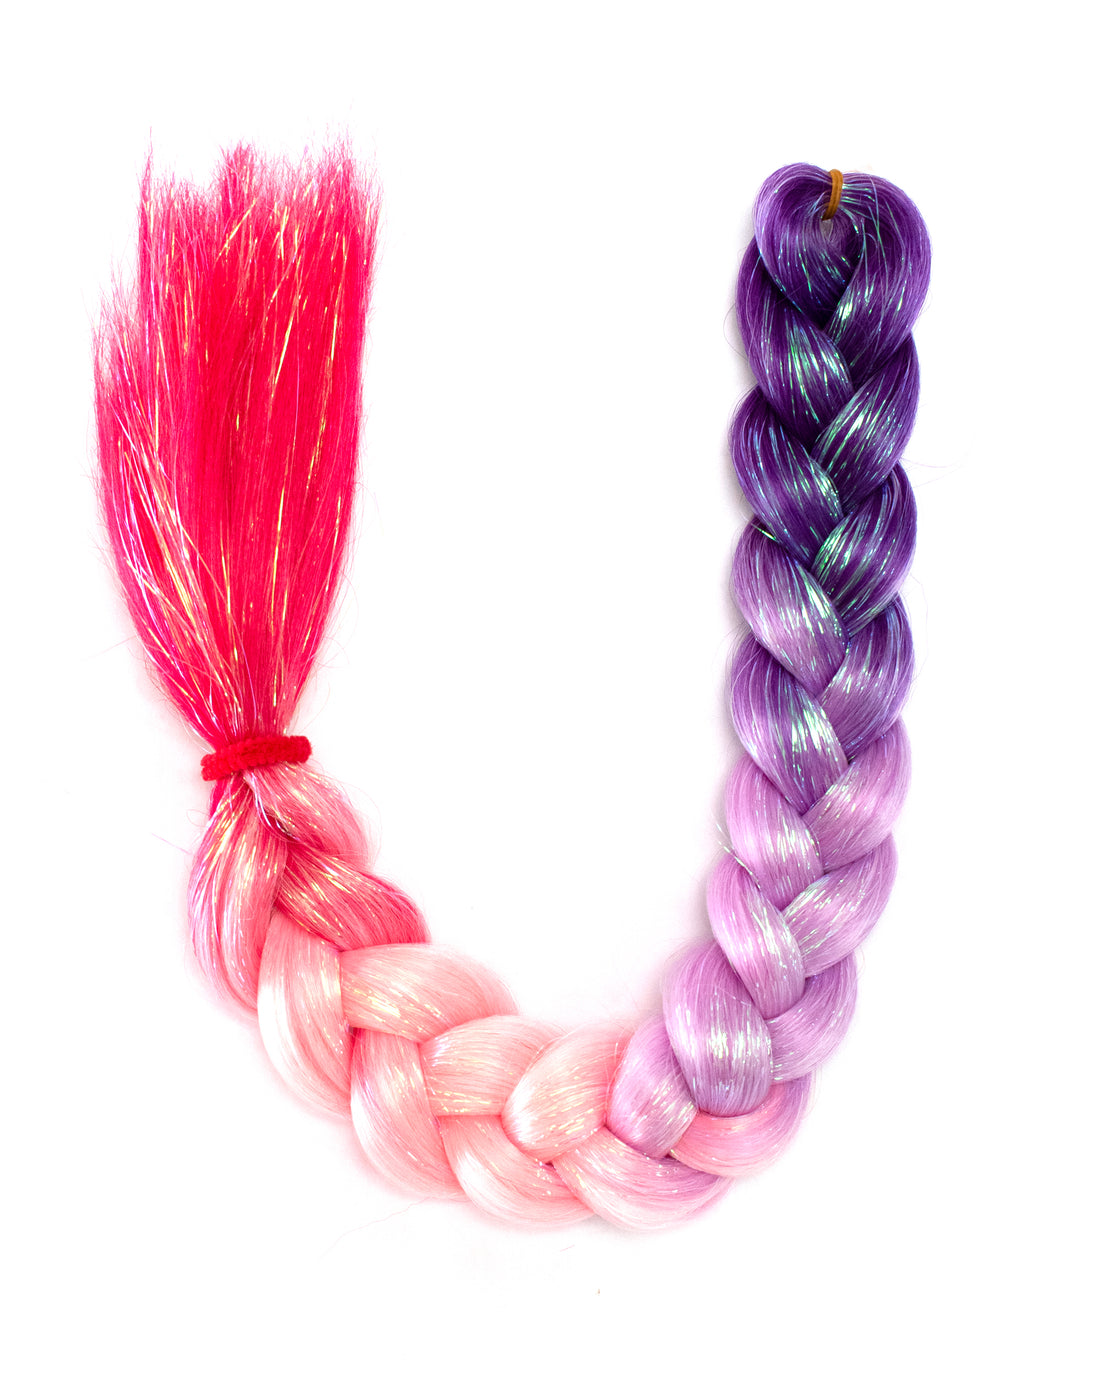 Sunrise - Purple Pink Red Ombre Braid-In Hair with Tinsel - Lunautics Braid-In Hair